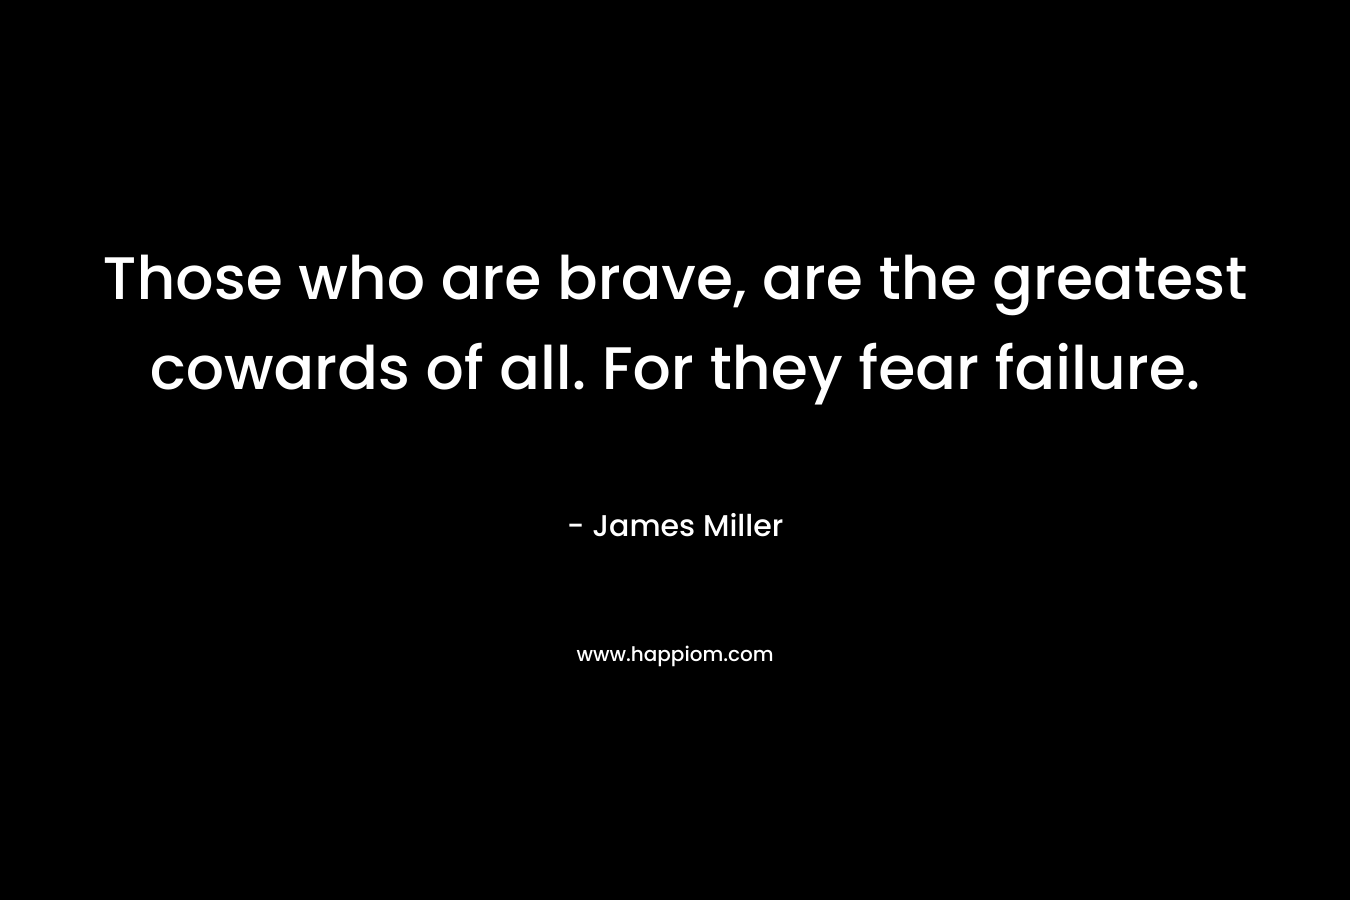 Those who are brave, are the greatest cowards of all. For they fear failure. – James Miller